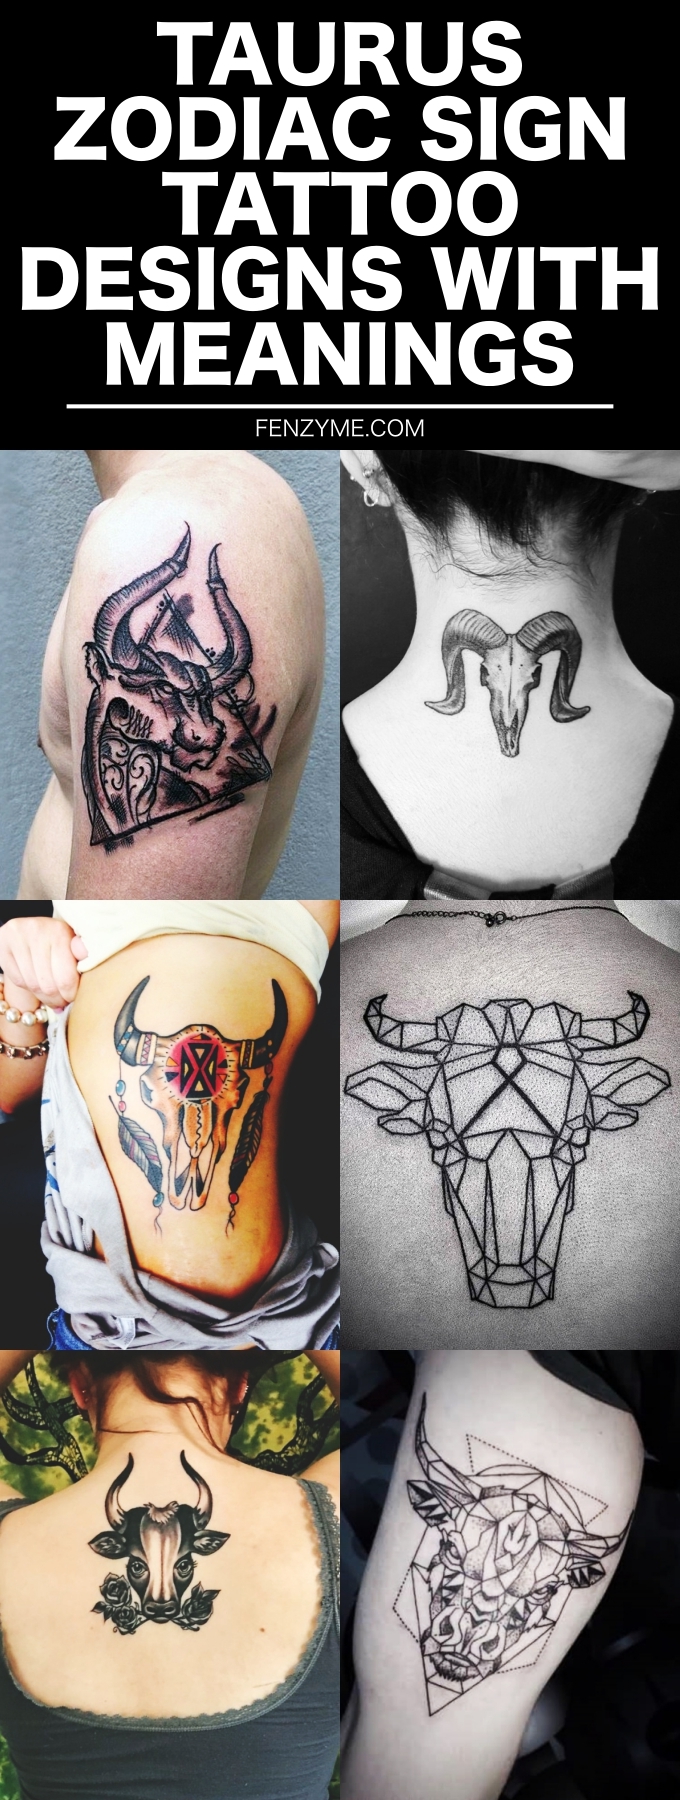 Taurus Zodiac Sign Tattoo Designs with Meanings